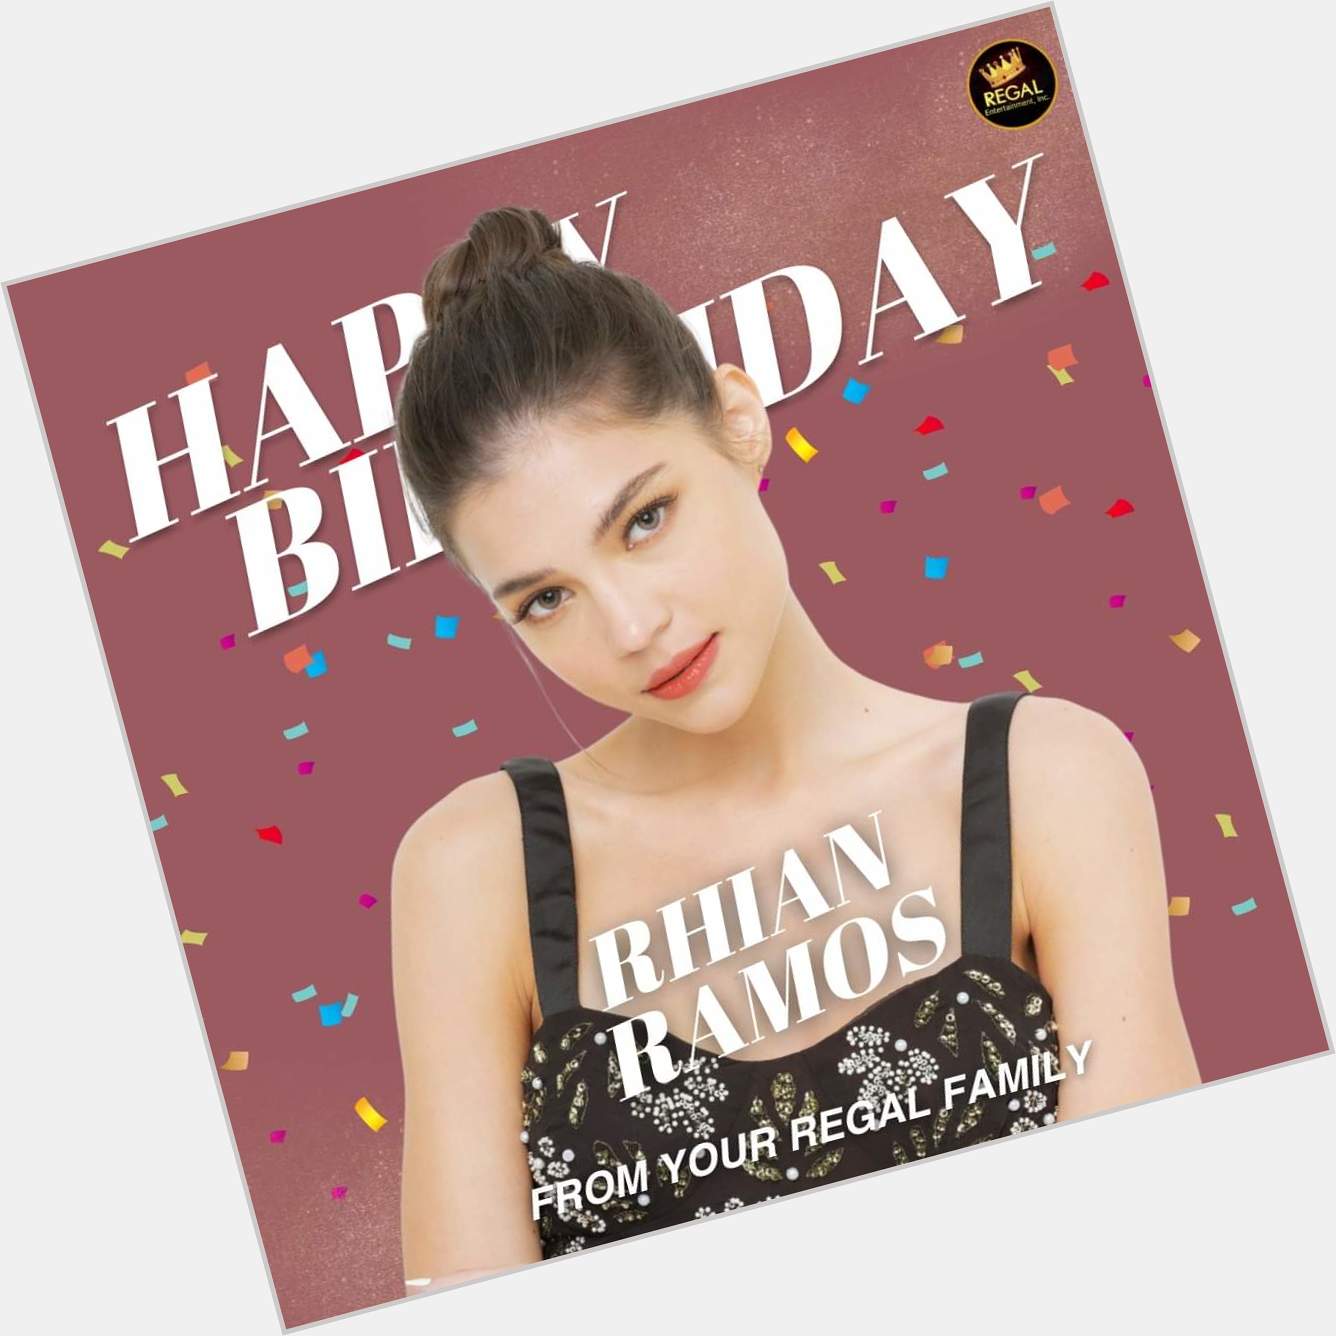 Happy Birthday, Rhian Ramos!  We wish you all the best in life! From your Regal Family!  